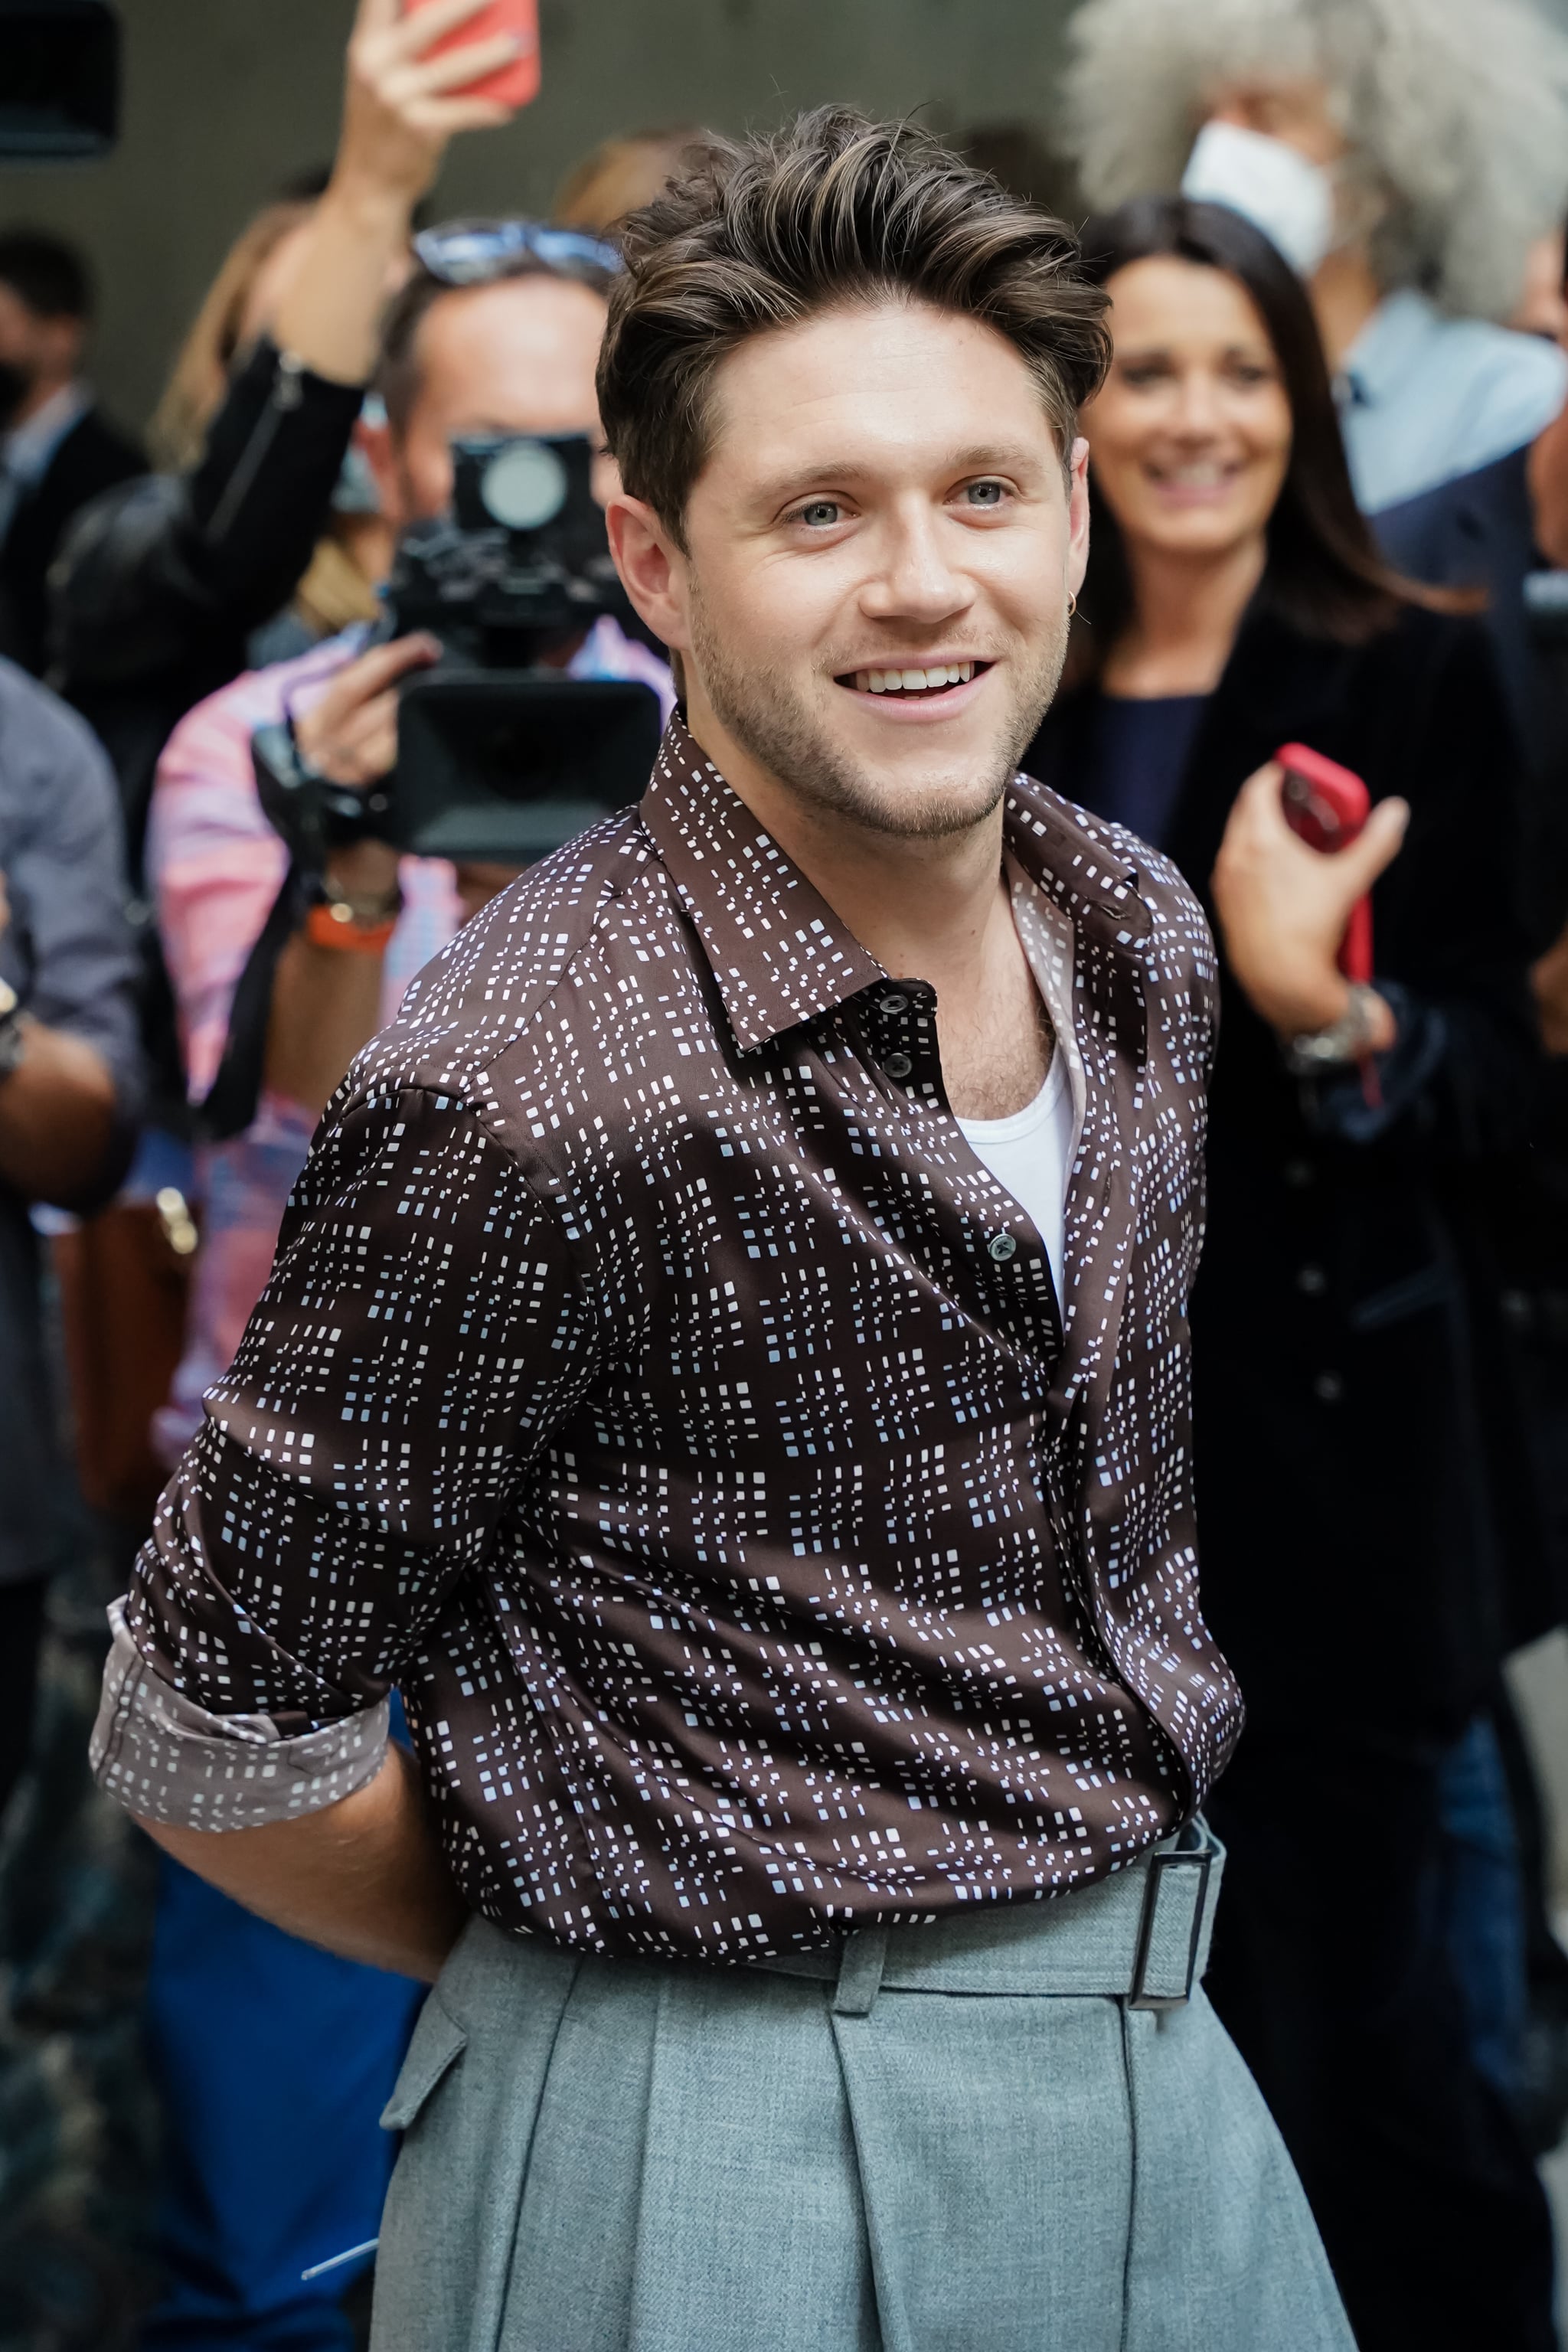 Irish singer Niall Horan guest at the Emporio Armani fashion show on the second day of Milan Fashion Week Women's collection Spring Summer 2022. Celebration of the 40 years of activity of the Emporio line. Milan (Italy), September 23rd, 2021 (Photo by Marco Piraccini/Archivio Marco Piraccini/Mondadori Portfolio via Getty Images)